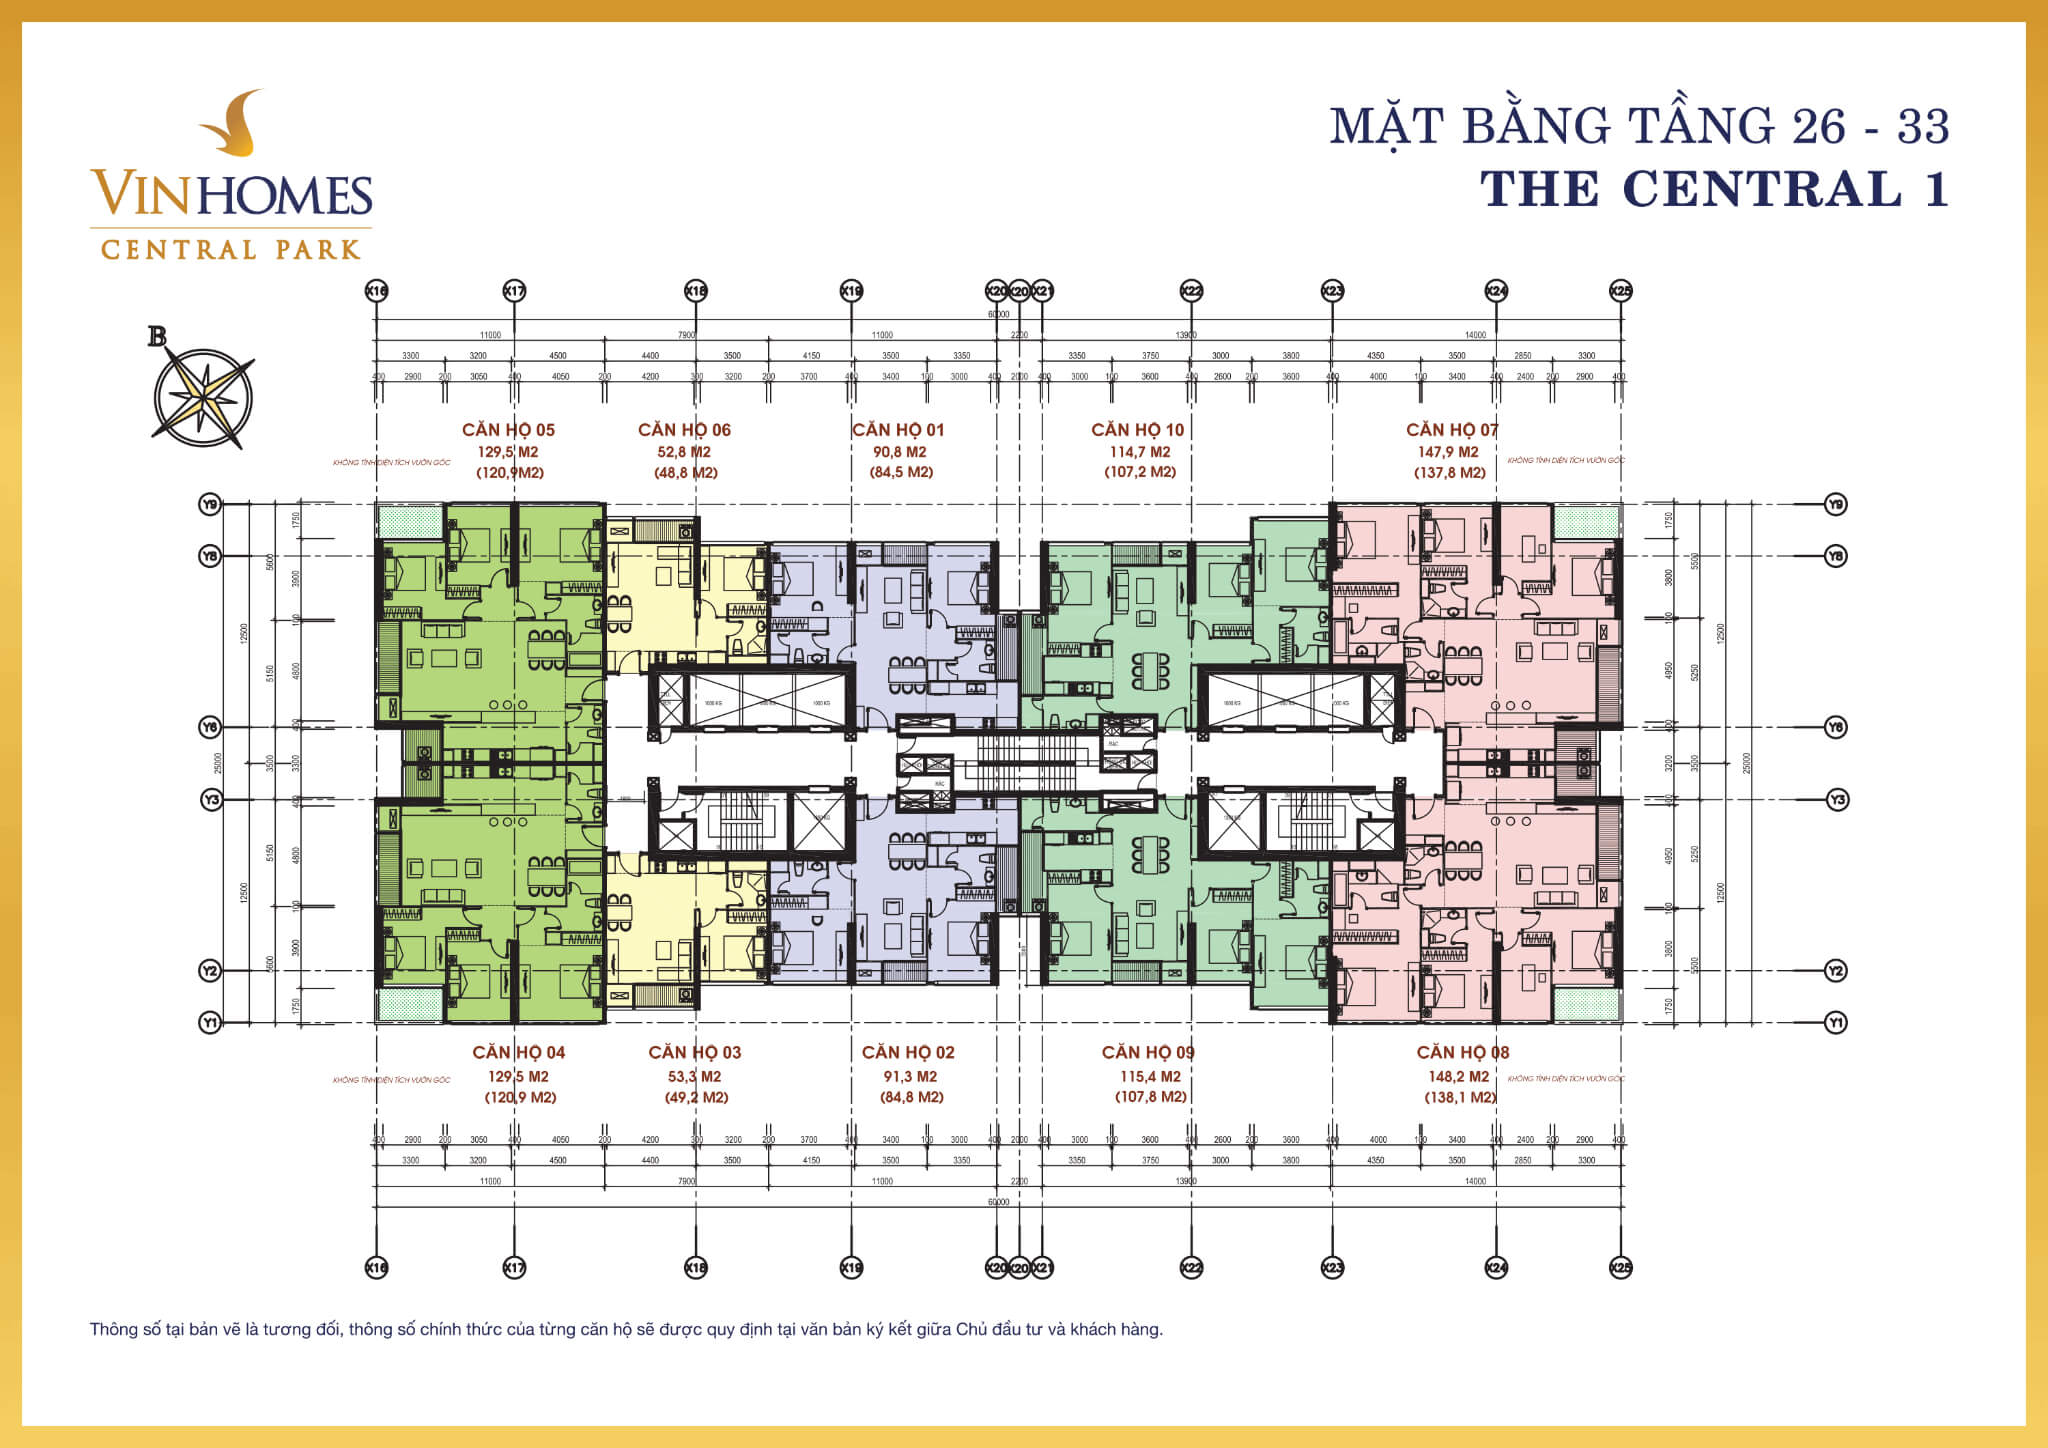 Mặt bằng layout tòa The Central 1 tầng 26-33 tại Vinhomes Central Park